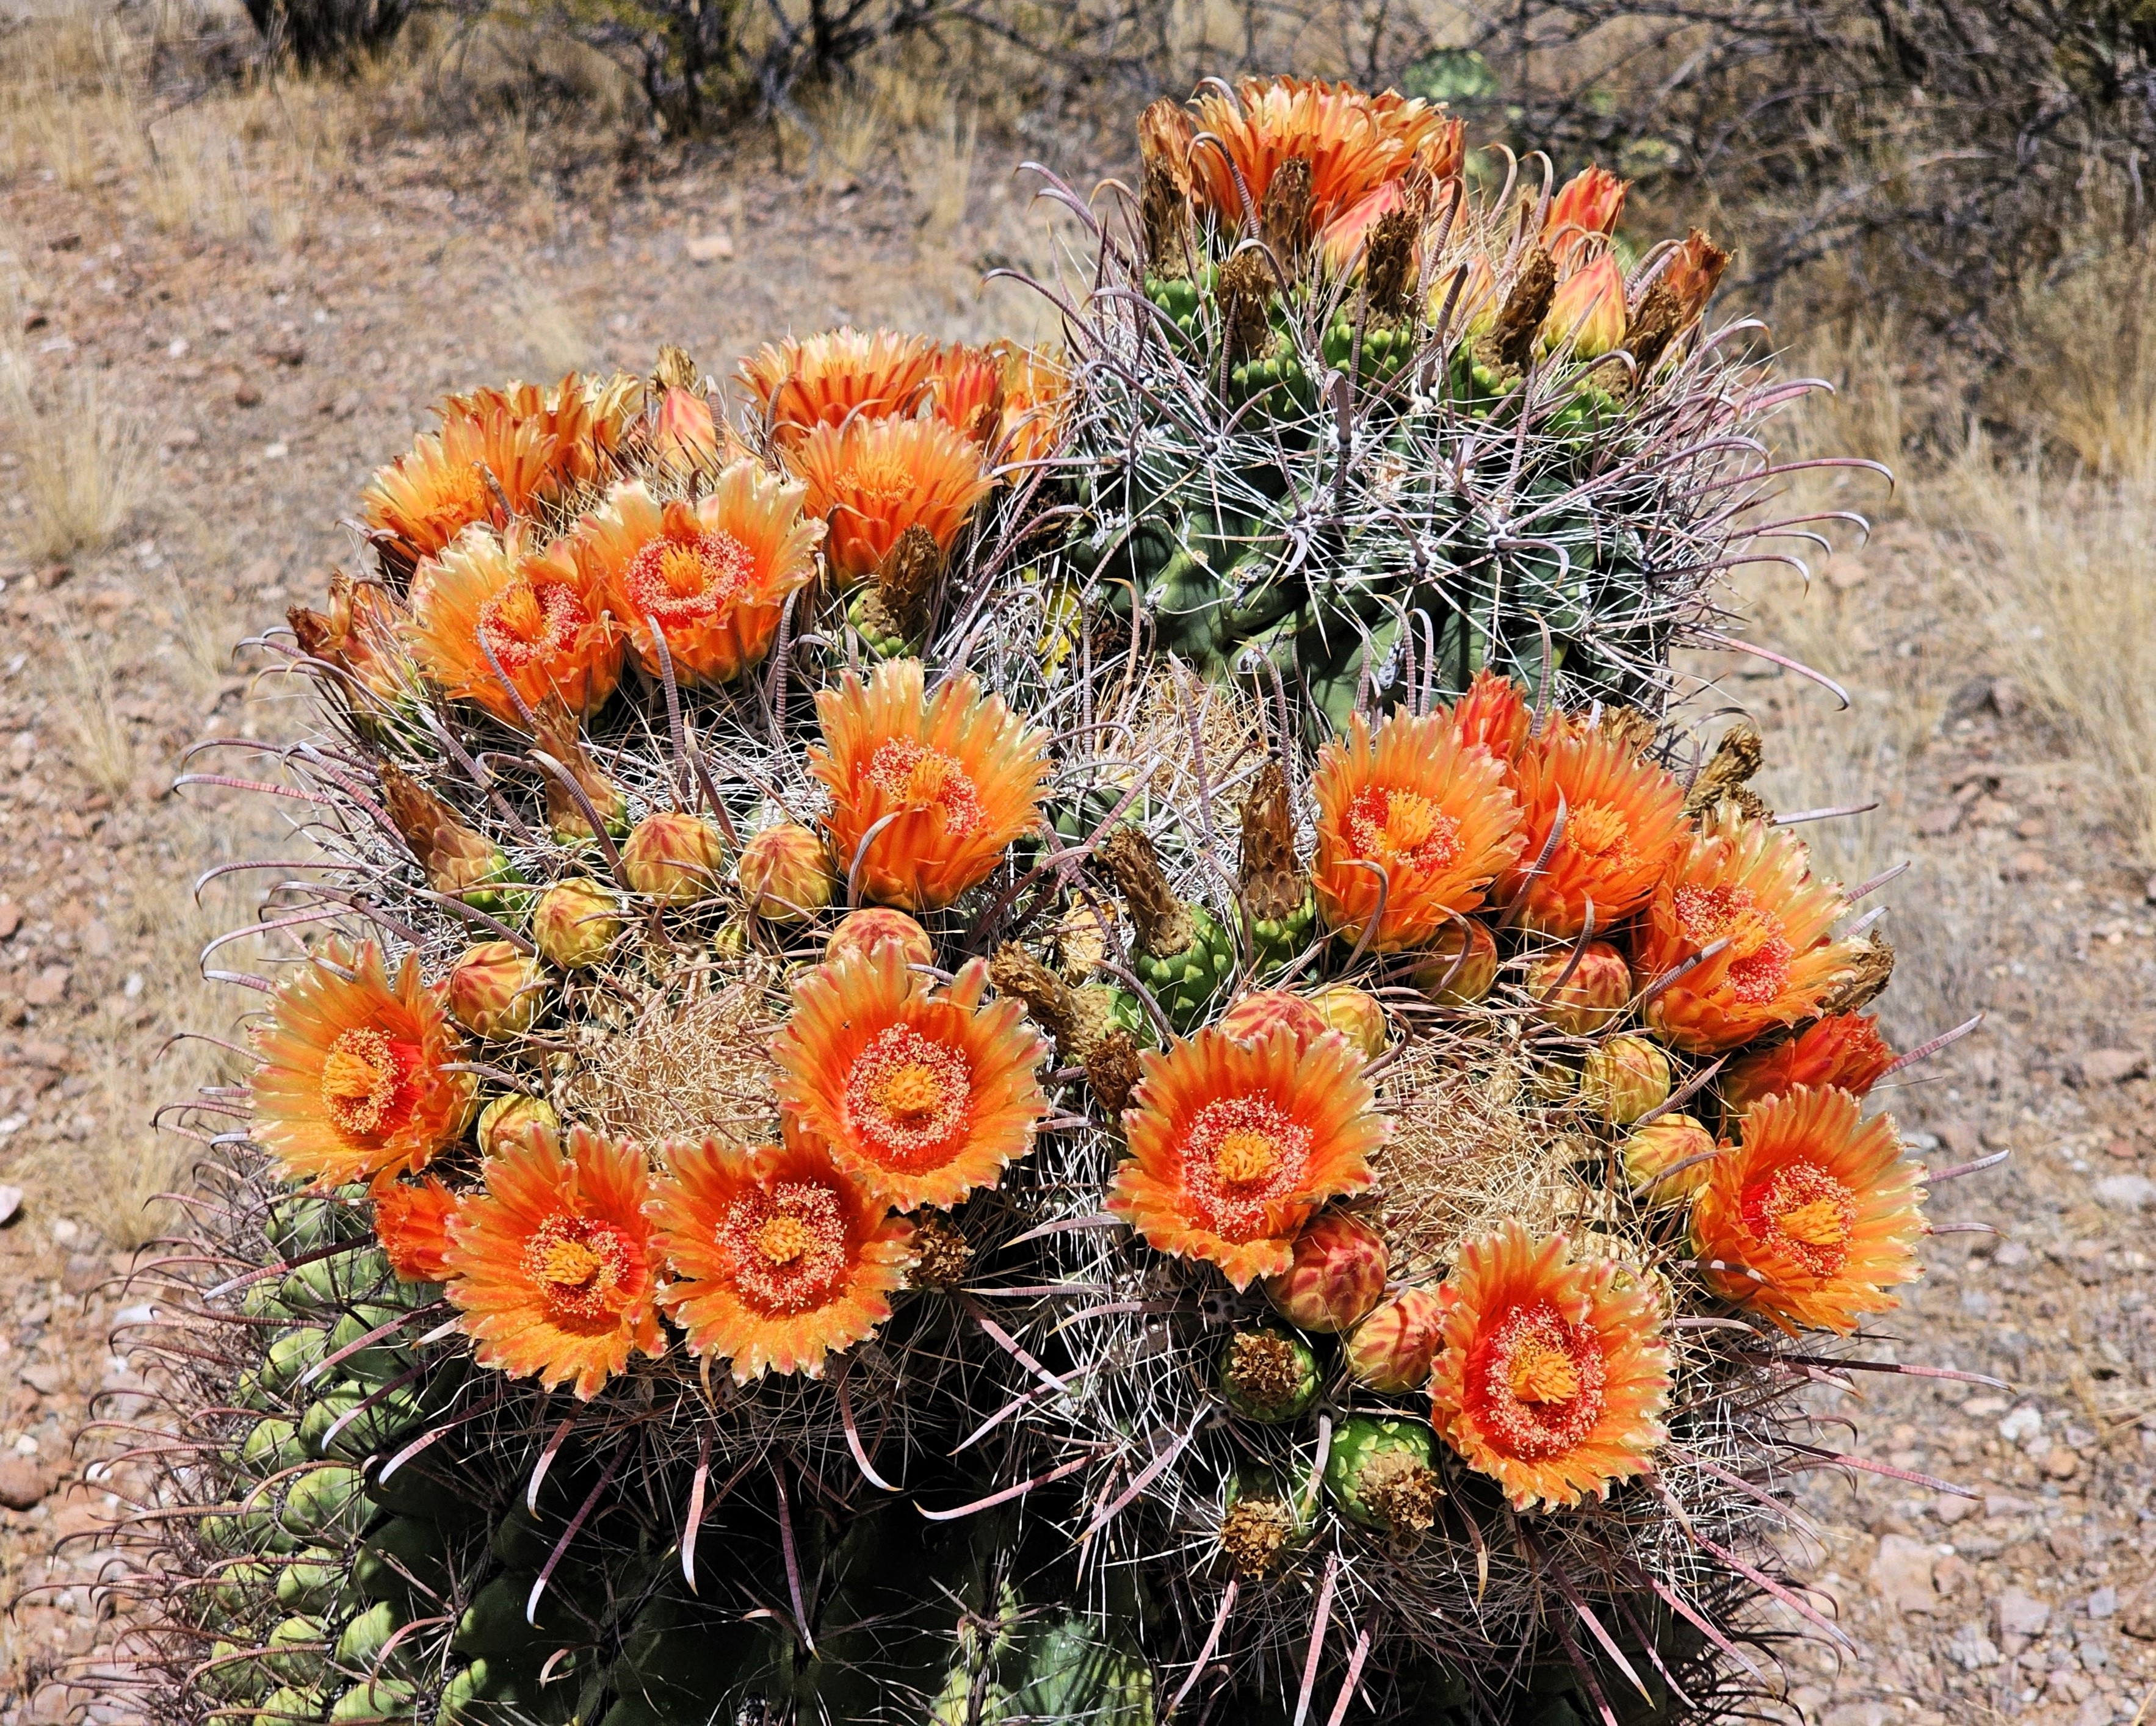 Photo by Tom Stark  |  Unusual Arizona or Fishhook Barrell Cactus with multiple heads with crowns of flowers.  